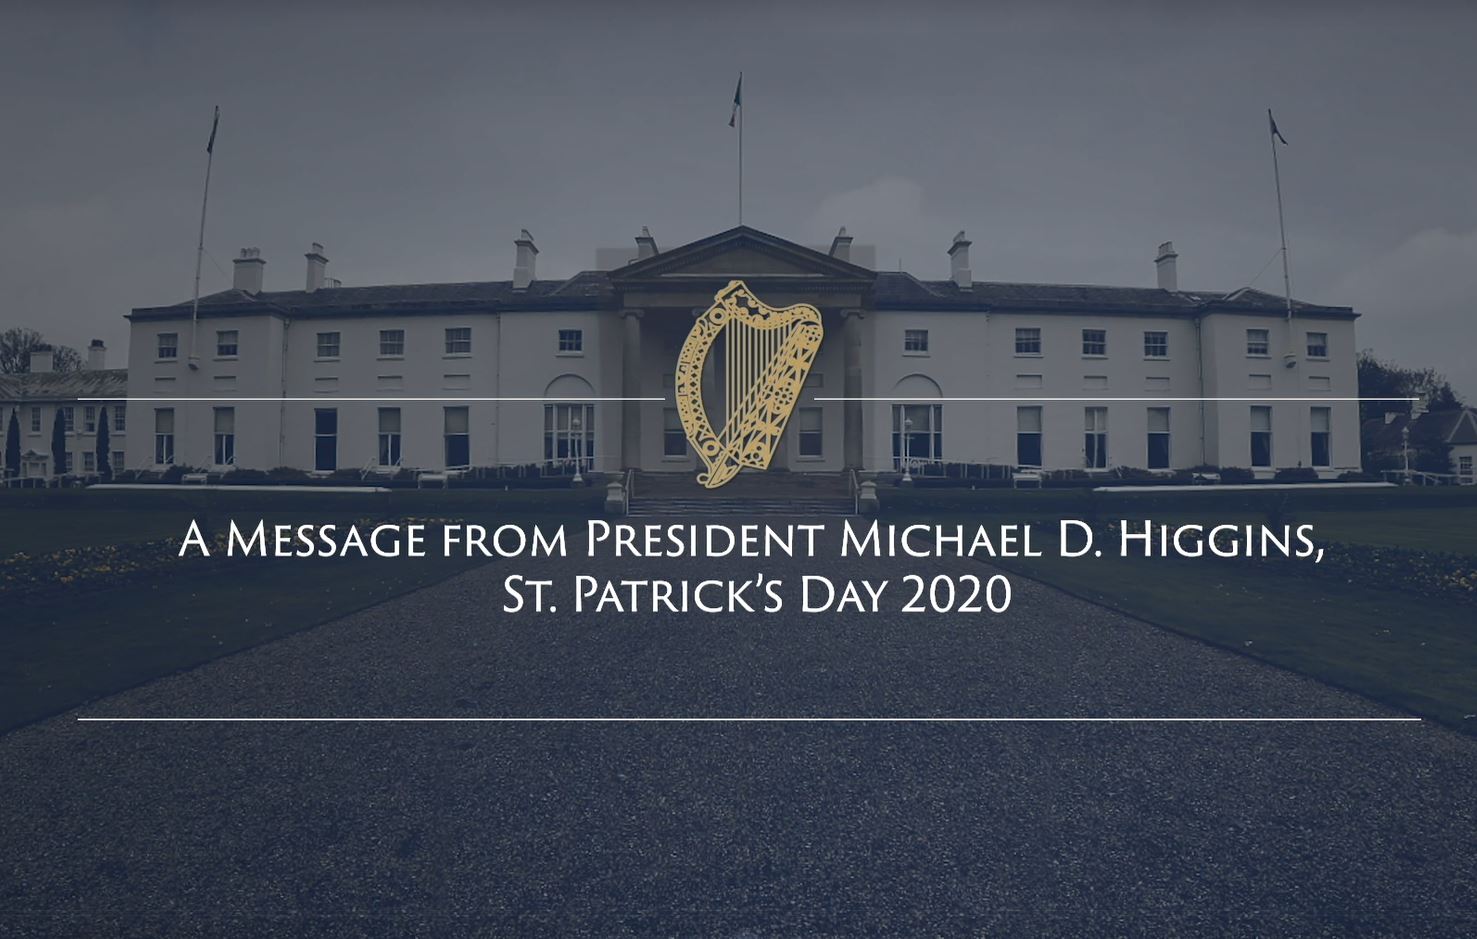 2020 St. Patrick's Day Message from President Michael D. Higgins